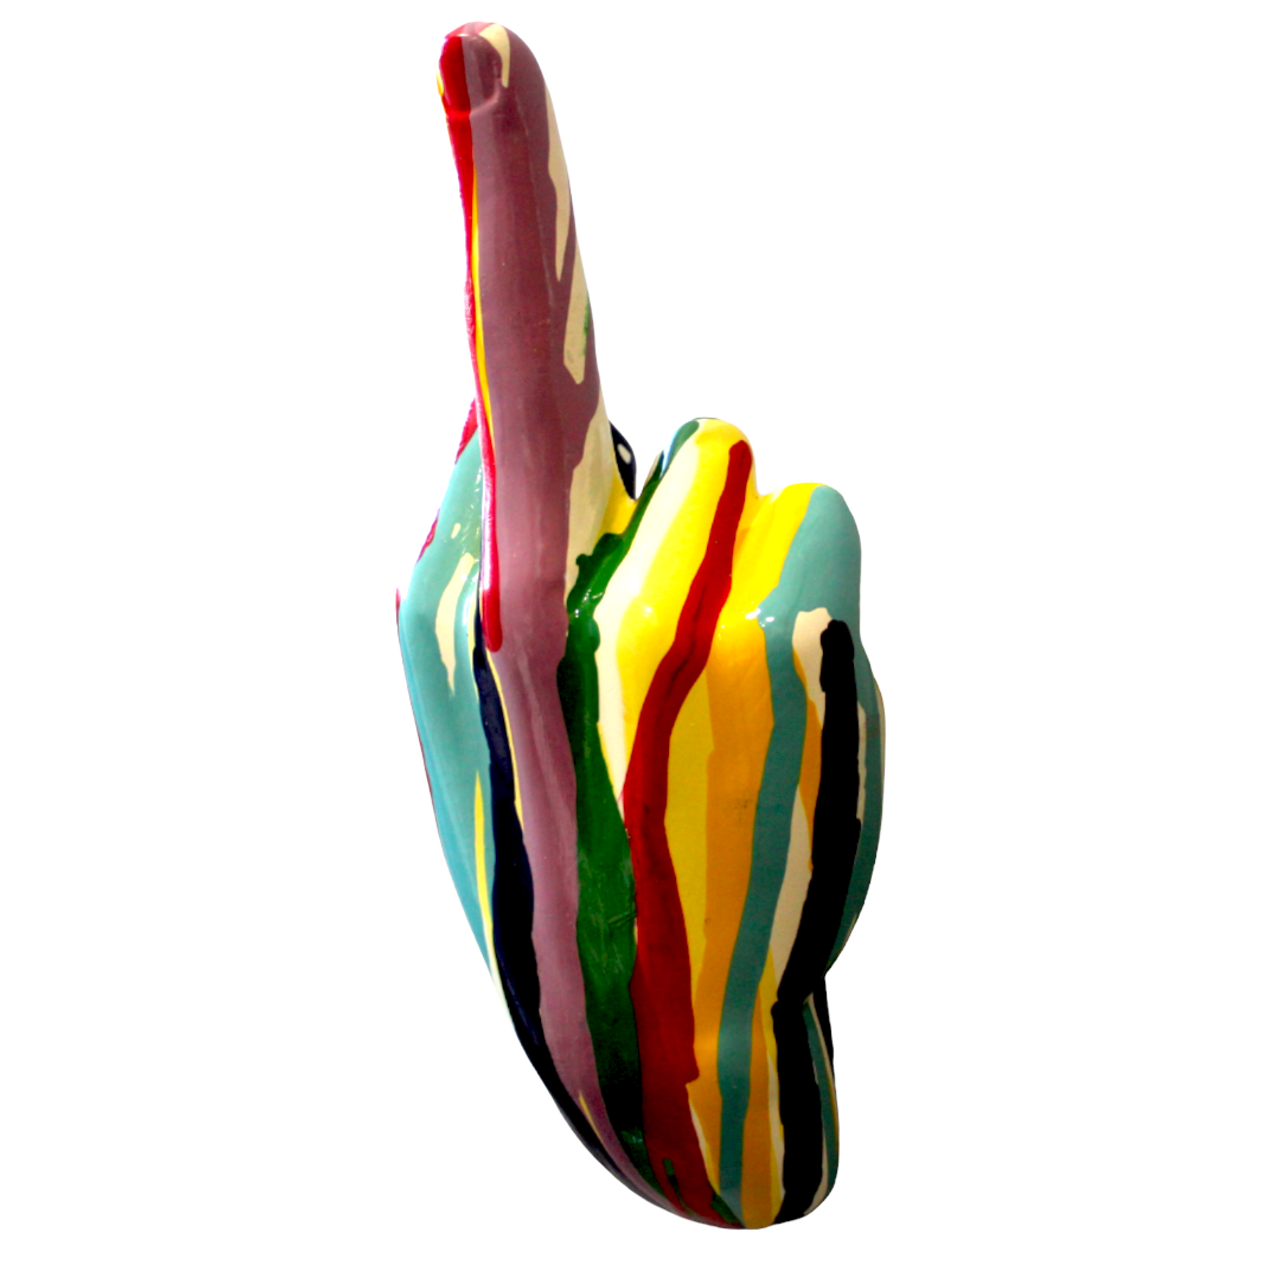 Interior Illusions Middle Finger Hand Wall Hook 9 Tall x 4.5 Inches Wide